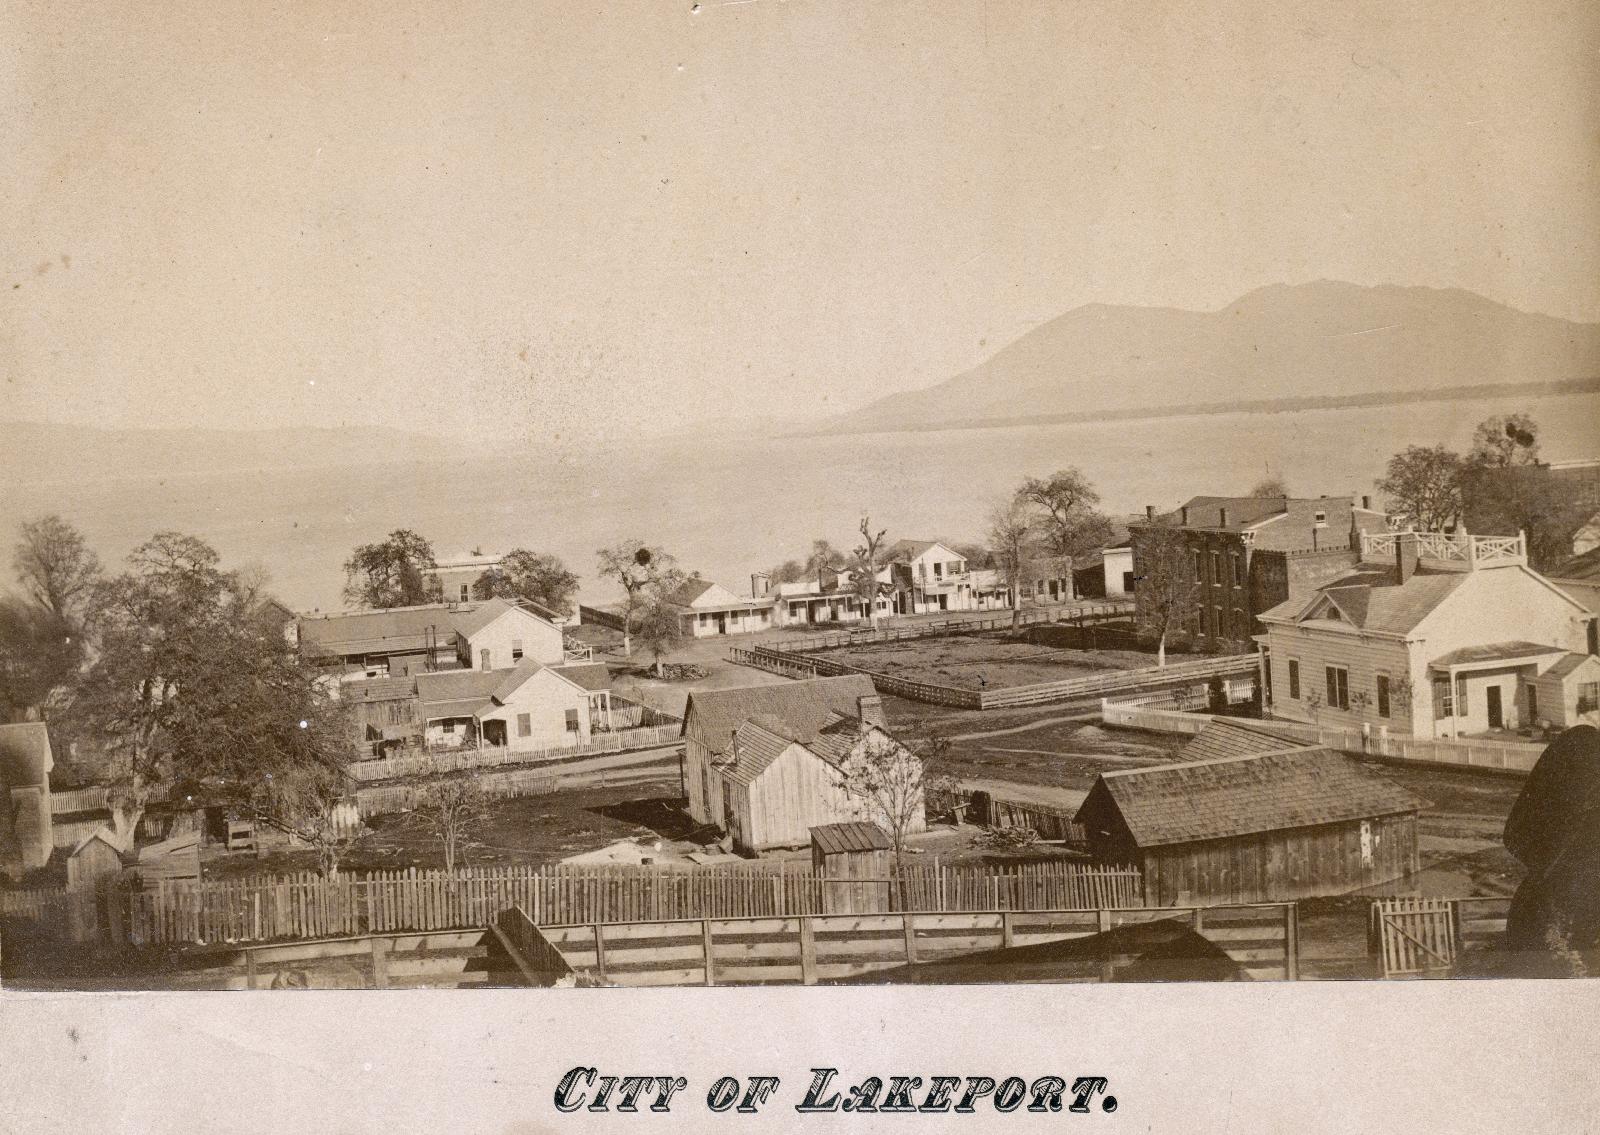 City of Lakeport postcard maybe